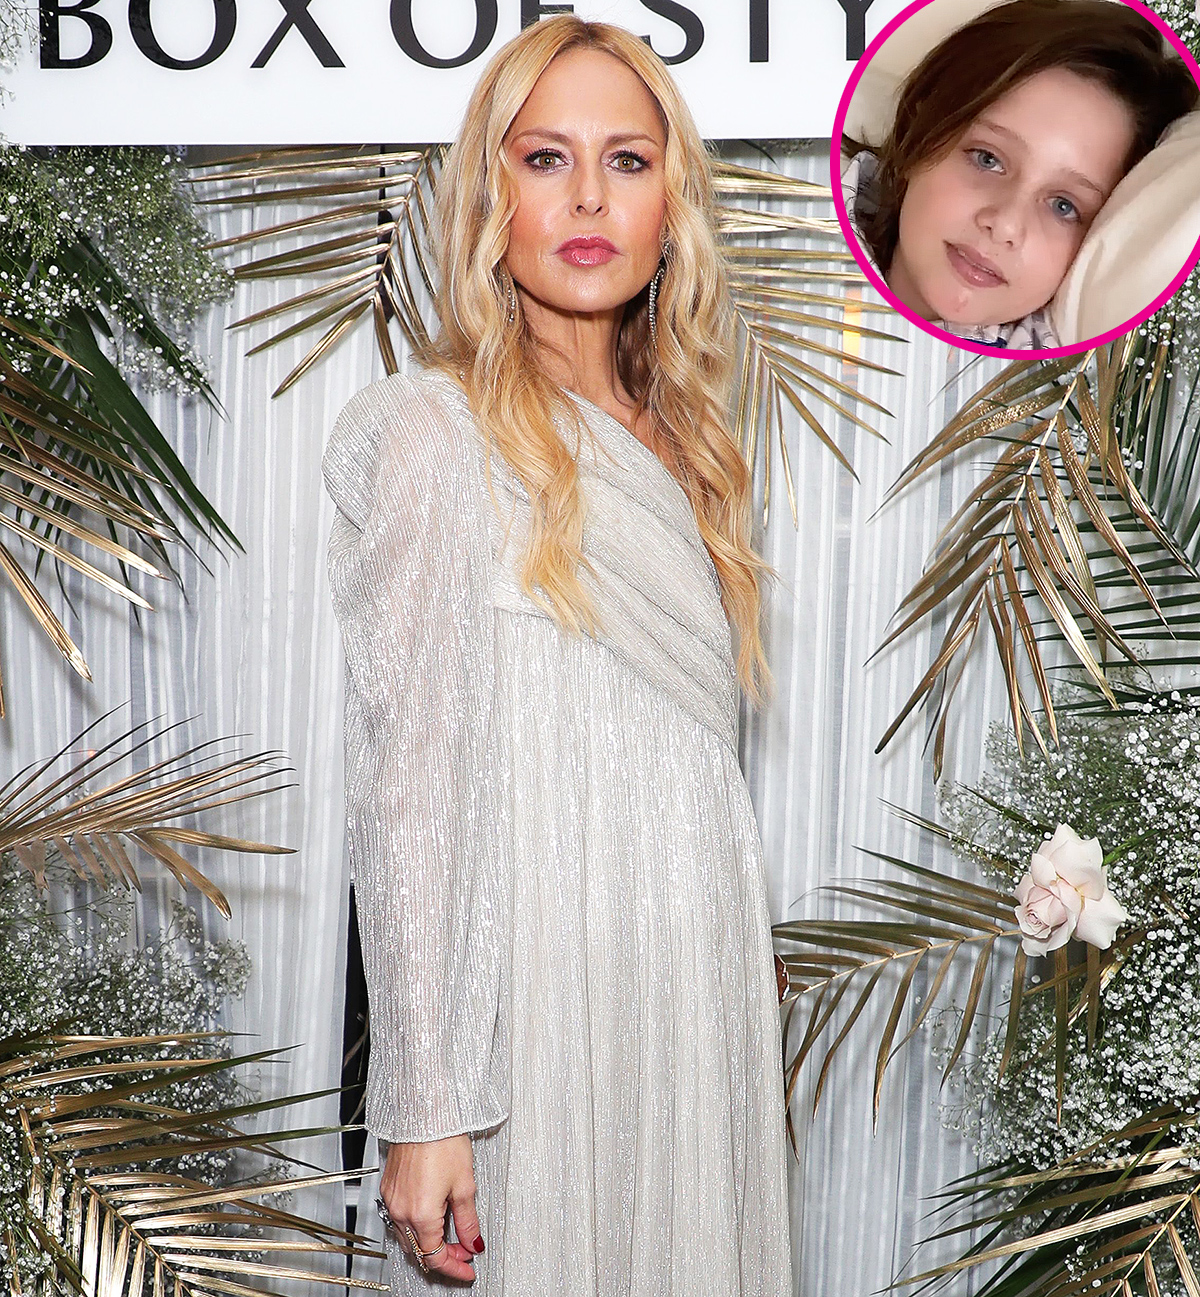 Rachel Zoe Revealed New Details of Son's Skiing Accident